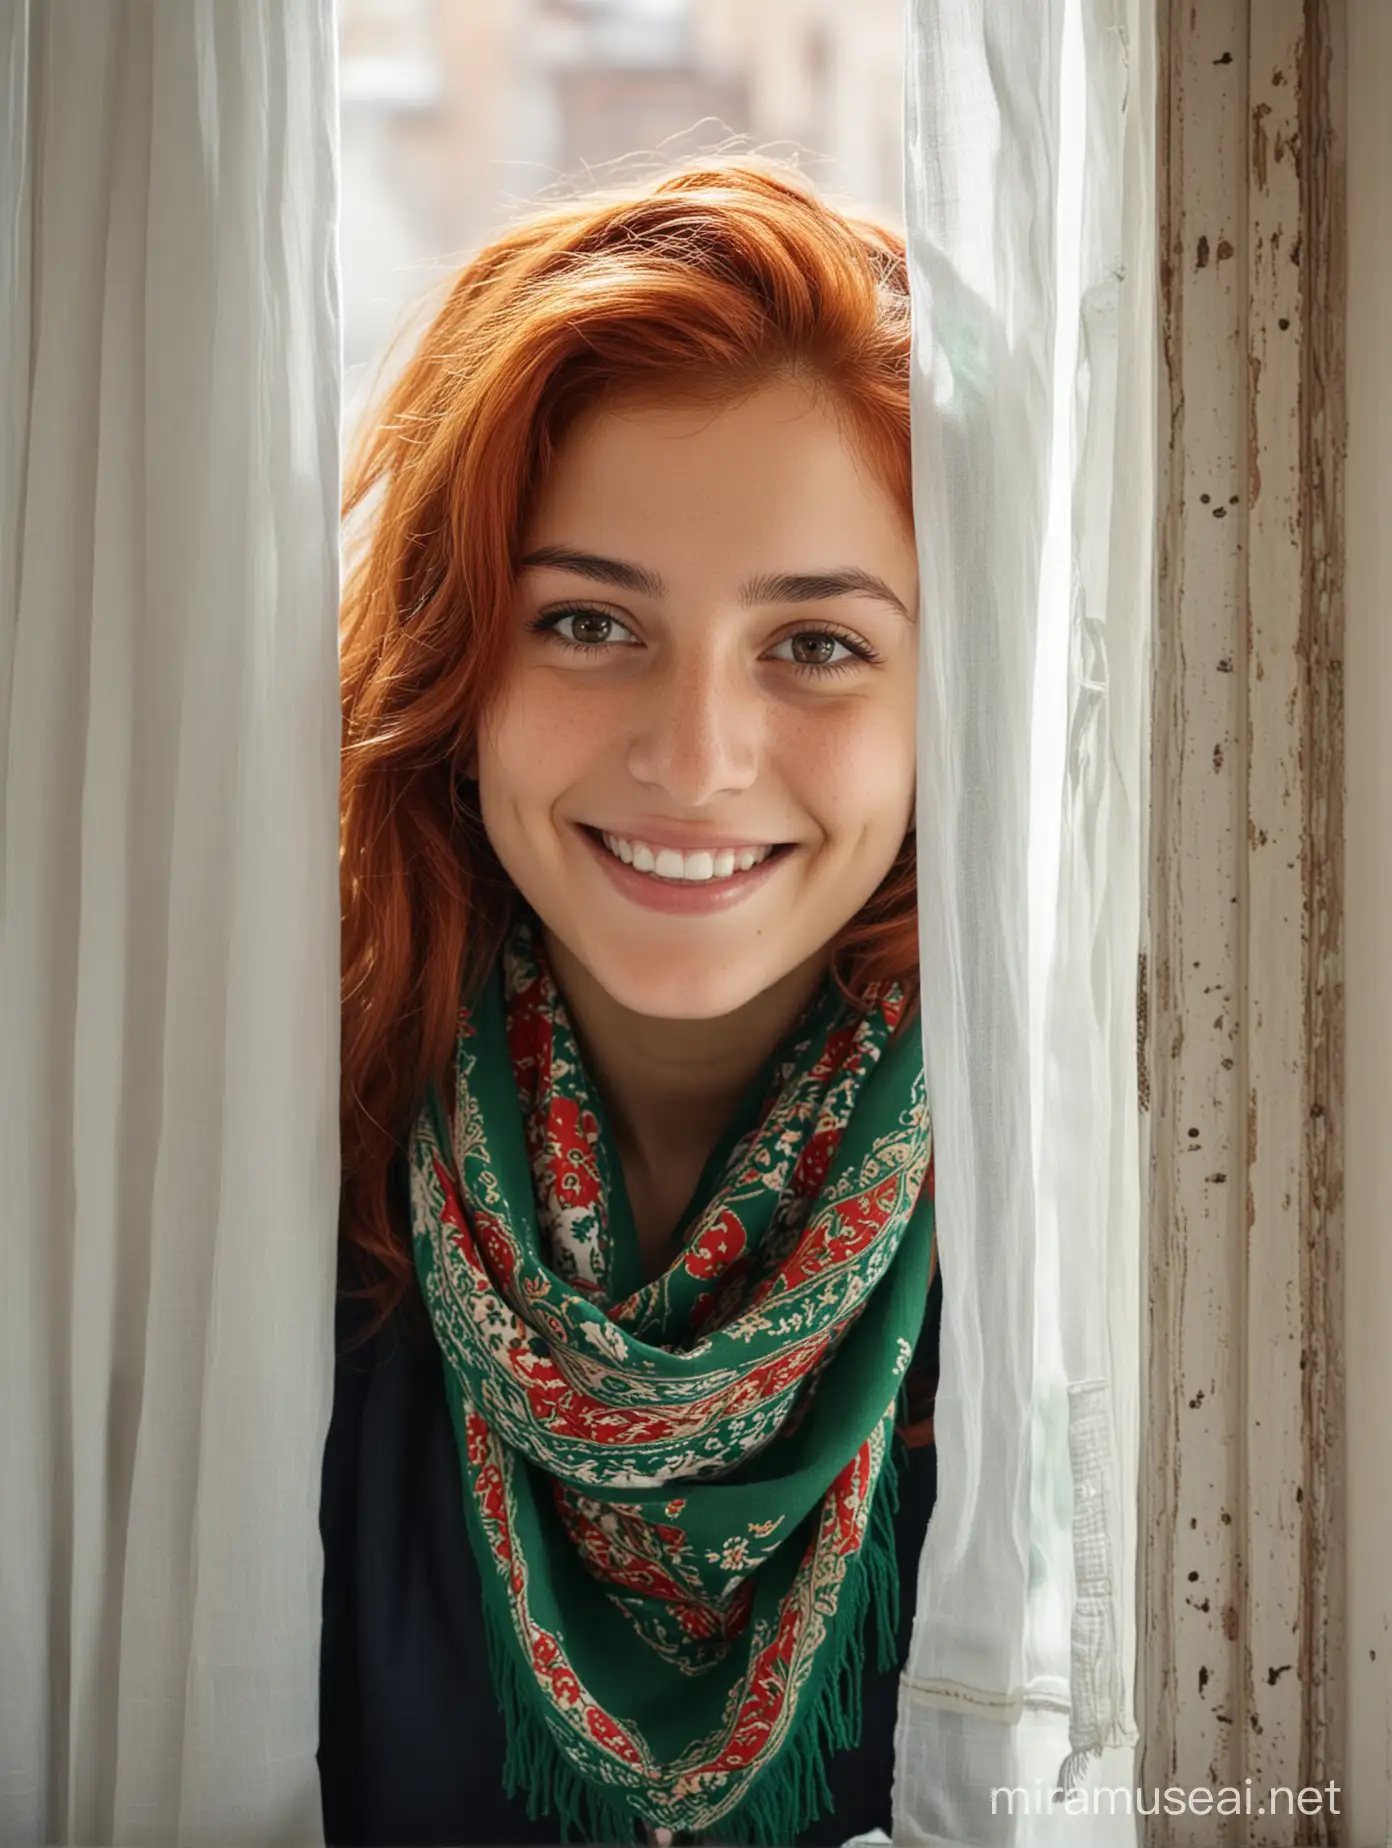 Joyful Iranian Girl Smiling by Vintage Window with White Curtain